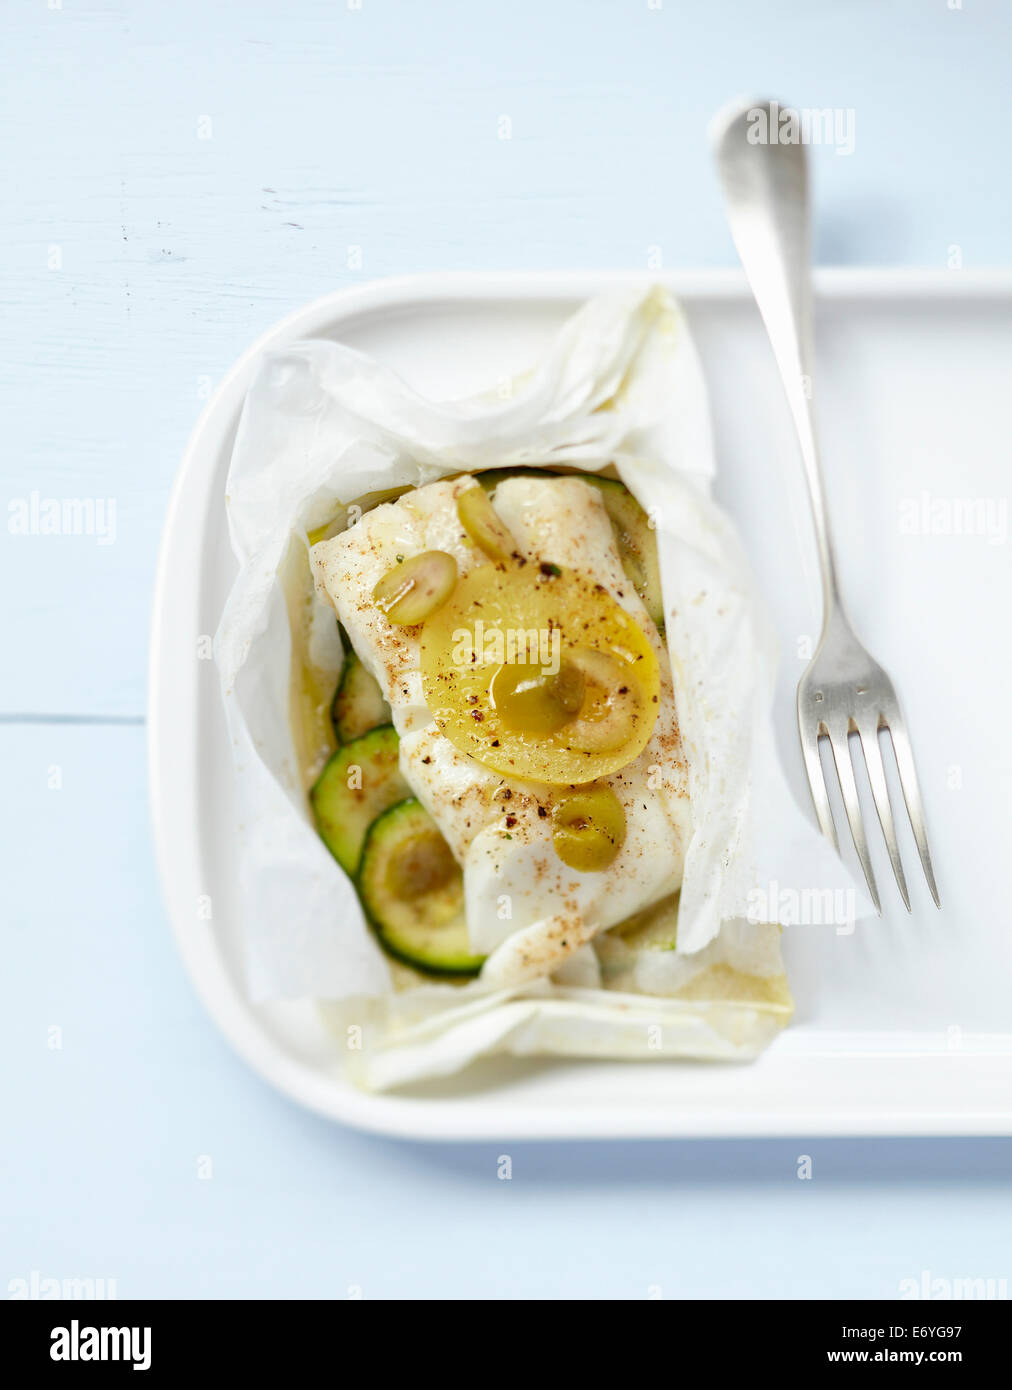 Cod with citrus confit and green olives cooked in wax paper Stock Photo